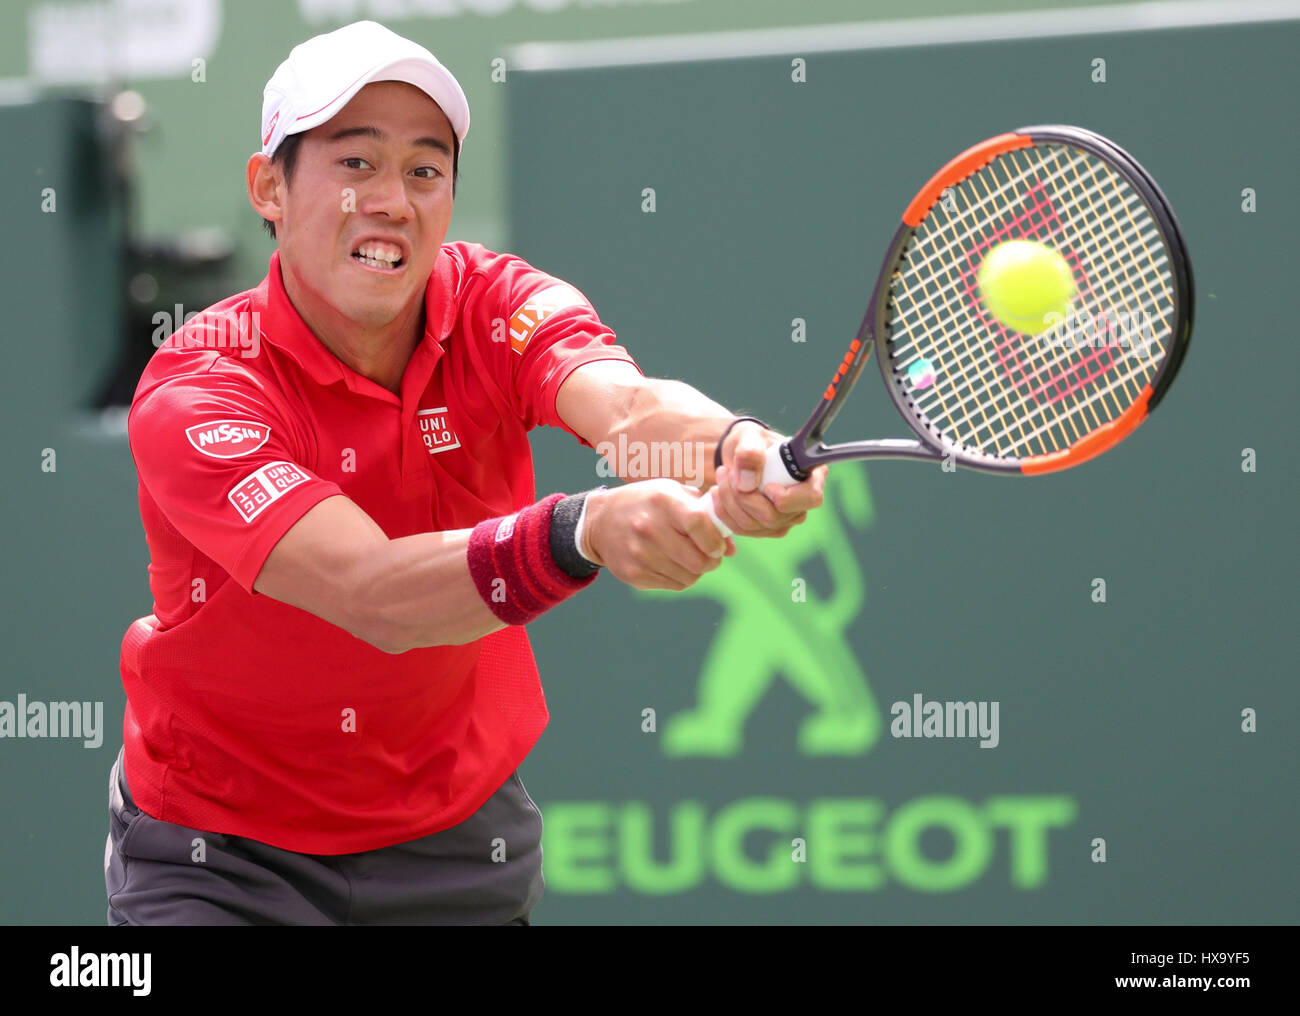 Key Biscayne, Florida, USA. 26th Mar, 2017. Kei Nishikori, of Japan, hits a backhand against Fernando Verdasco, of Spain, during his winning match at the 2017 Miami Open presented by Itau professional tennis tournament, played at Crandon Park Tennis Center in Key Biscayne, Florida, USA. Nishikori d Verdasco 7-6(2) 6-7(5) 6-1. Mario Houben/CSM/Alamy Live News Stock Photo